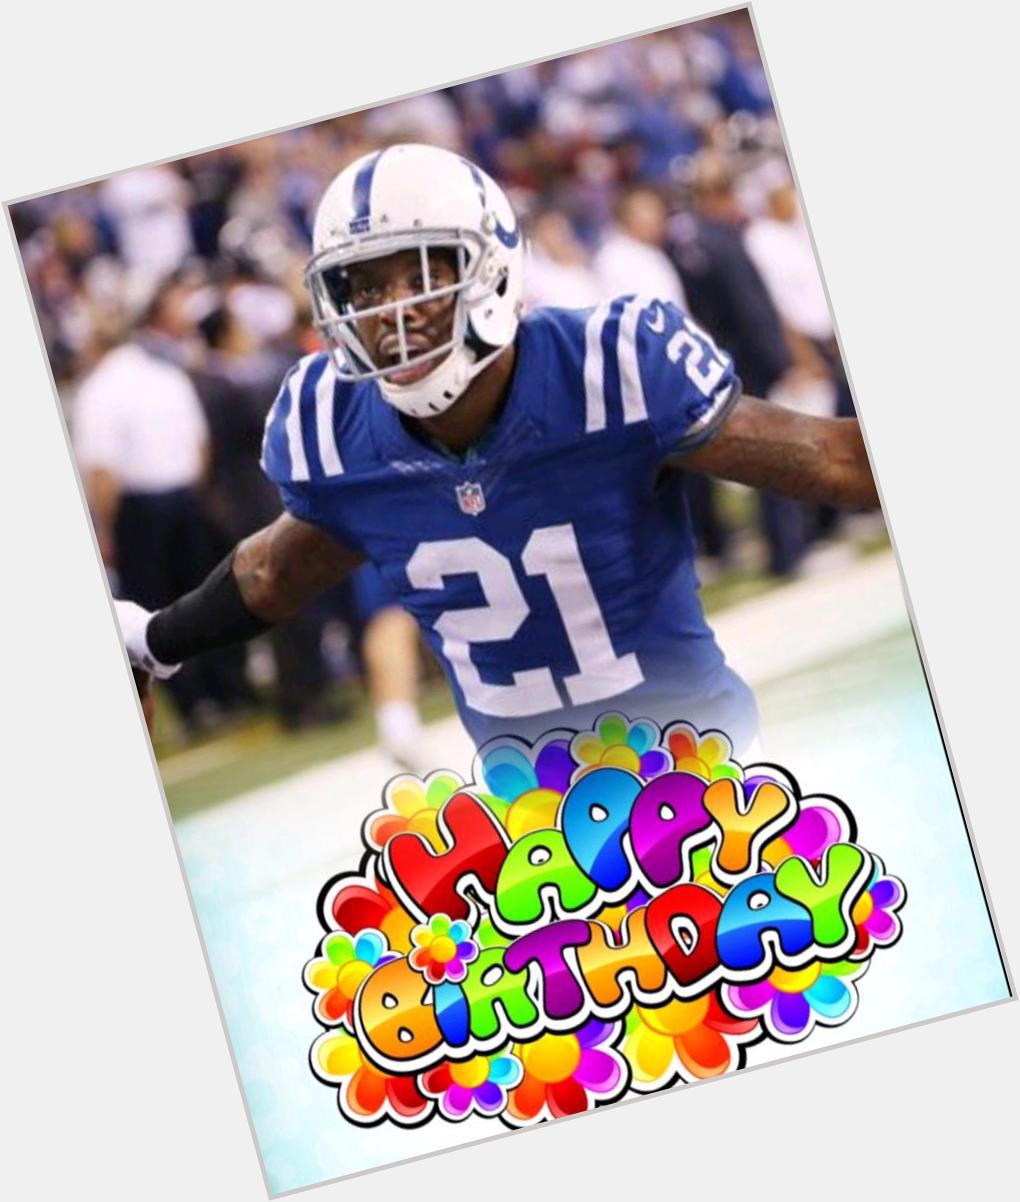 Happy Birthday Vontae Davis! After making his first pro bowl last year, we hope to see him make more in years to come 